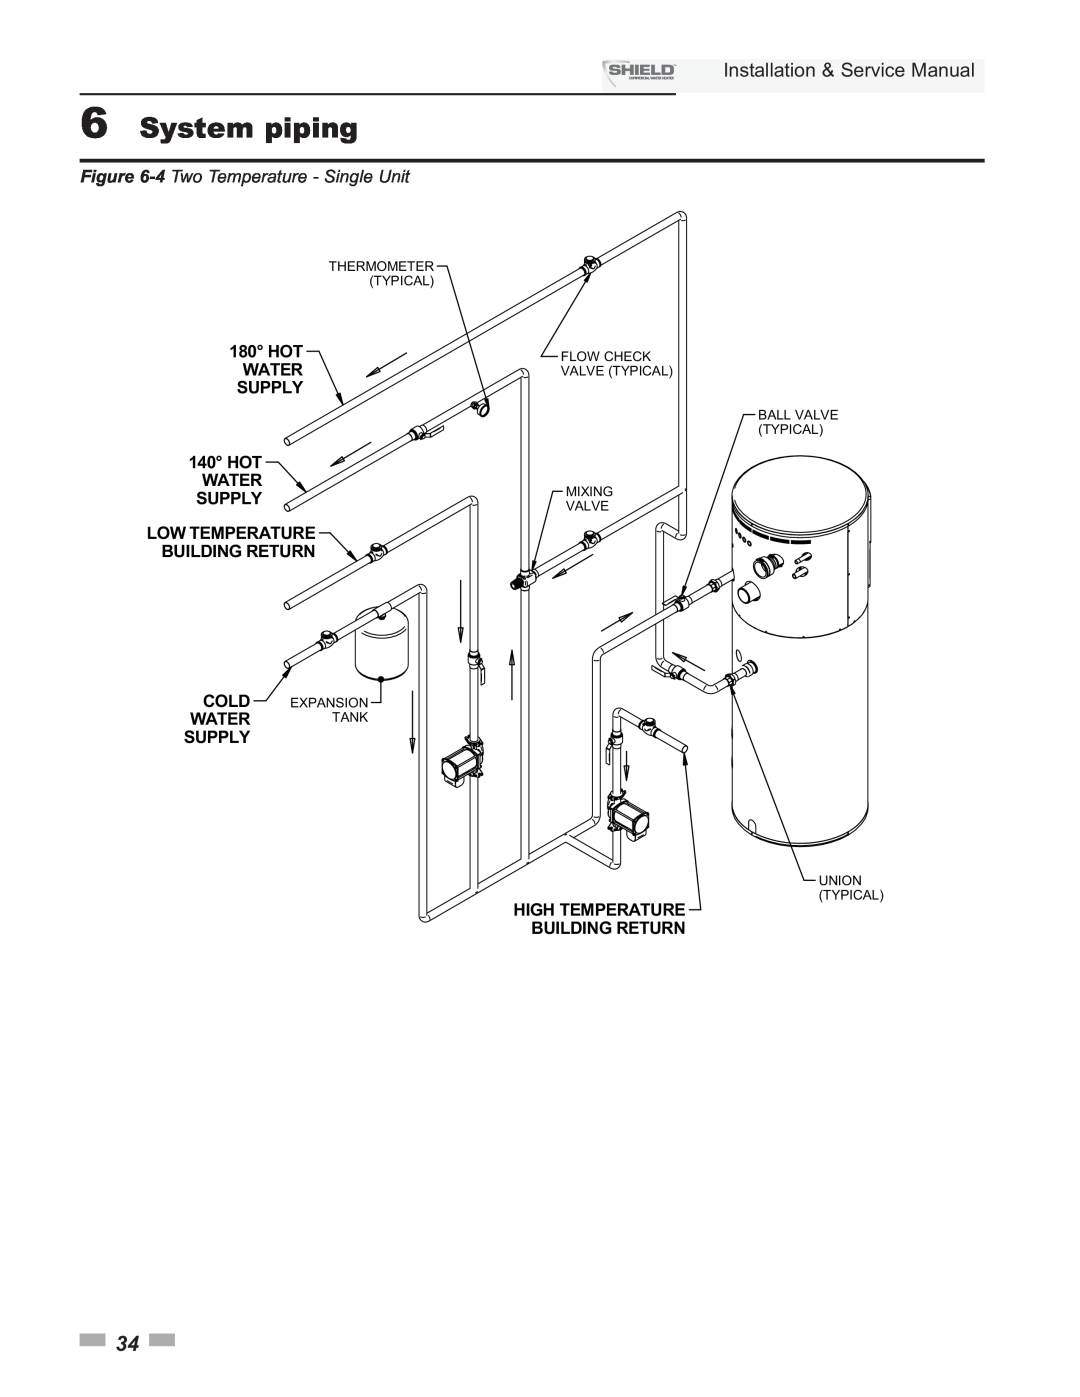 Lochinvar SNA400-125 6System piping, Installation & Service Manual, 4 Two Temperature - Single Unit, Hot Water Supply 